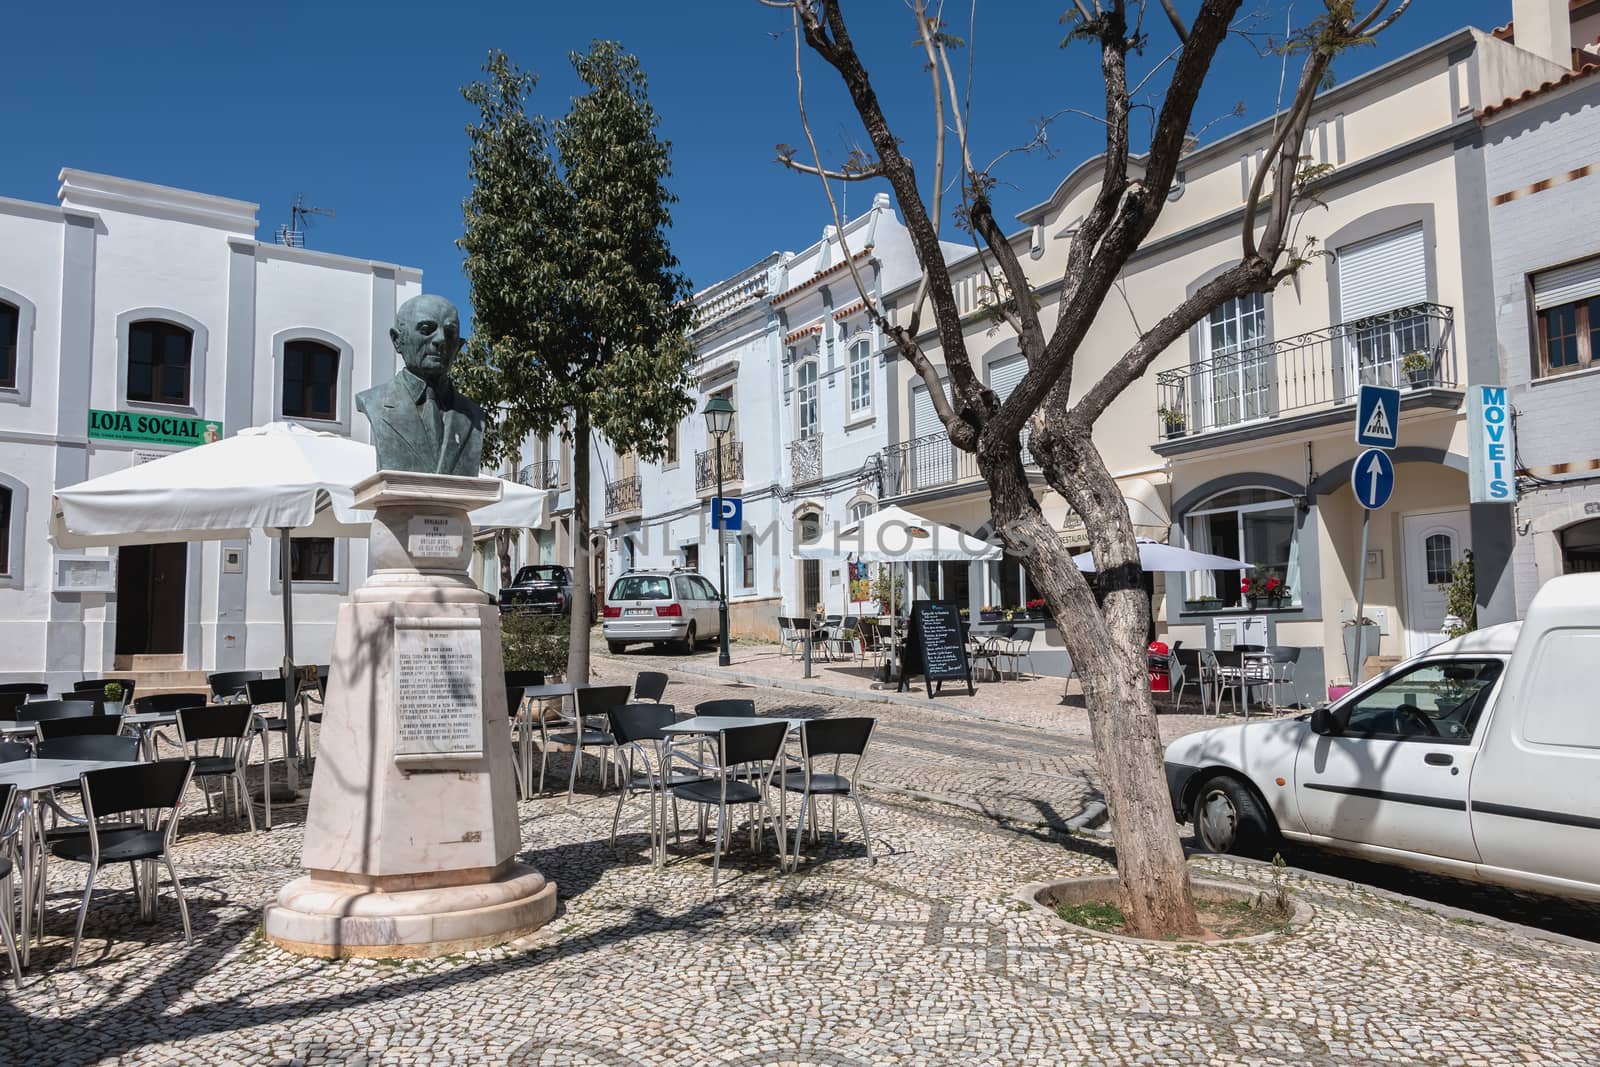 Moncarapacho, Portugal - May 4, 2018: Street atmosphere and architecture typical of a small town in the Algarve where people are walking on a spring day